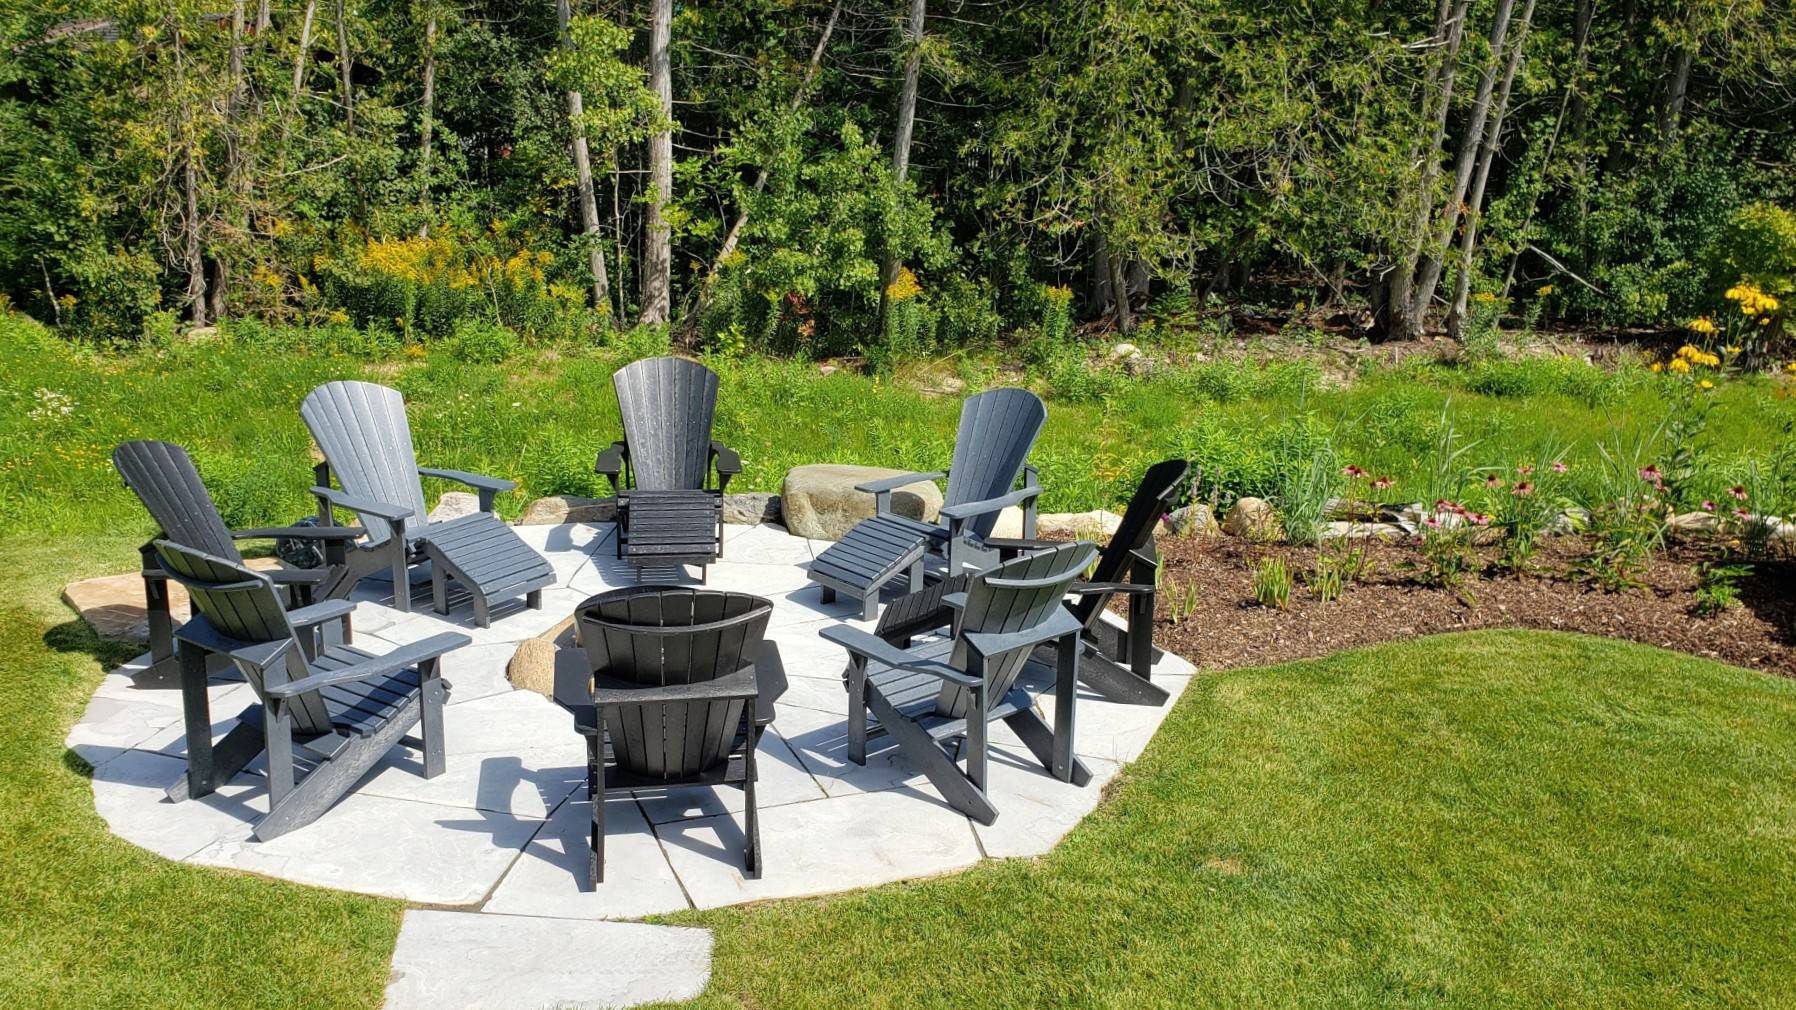 A serene outdoor setting with a circle of grey Adirondack chairs around a fire pit, surrounded by a lush garden and trees on a sunny day.